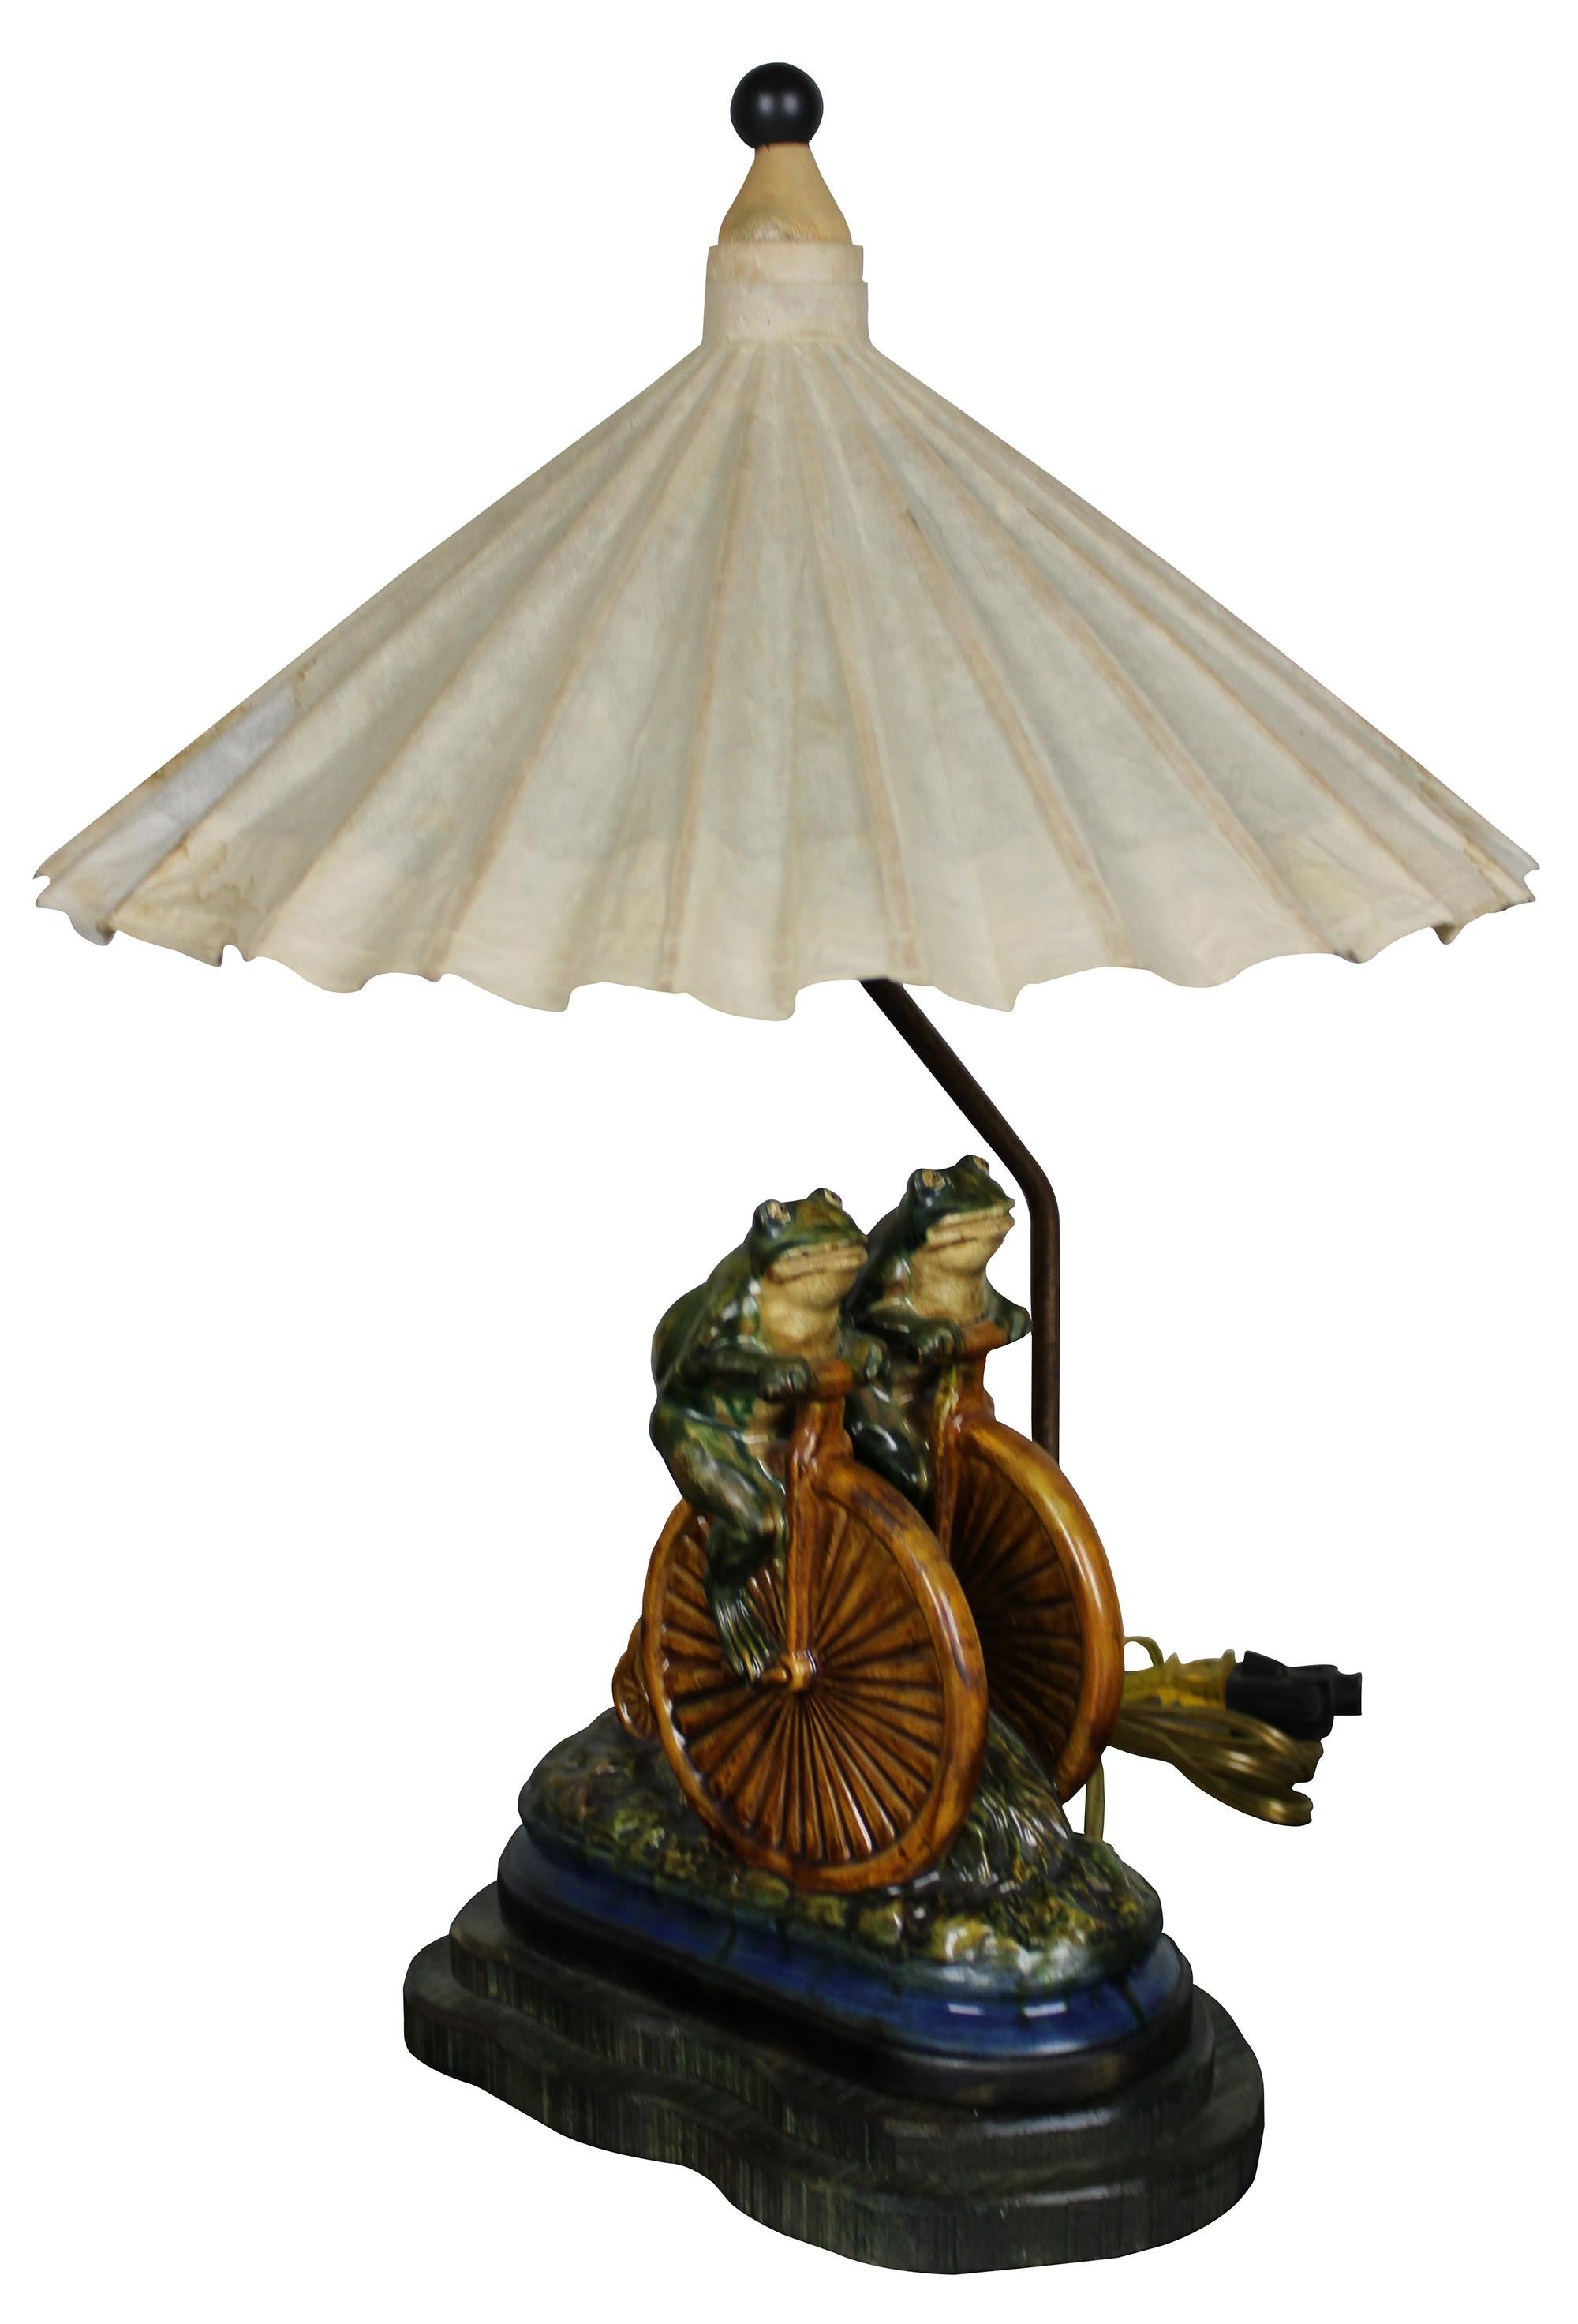 Late 20th century Frederick cooper desk lamp. A figural design in ceramic feautiring two frogs riding a penny farthing bicycle over wood cut base. Includes two way lights and a parasol shade. Measure: 23